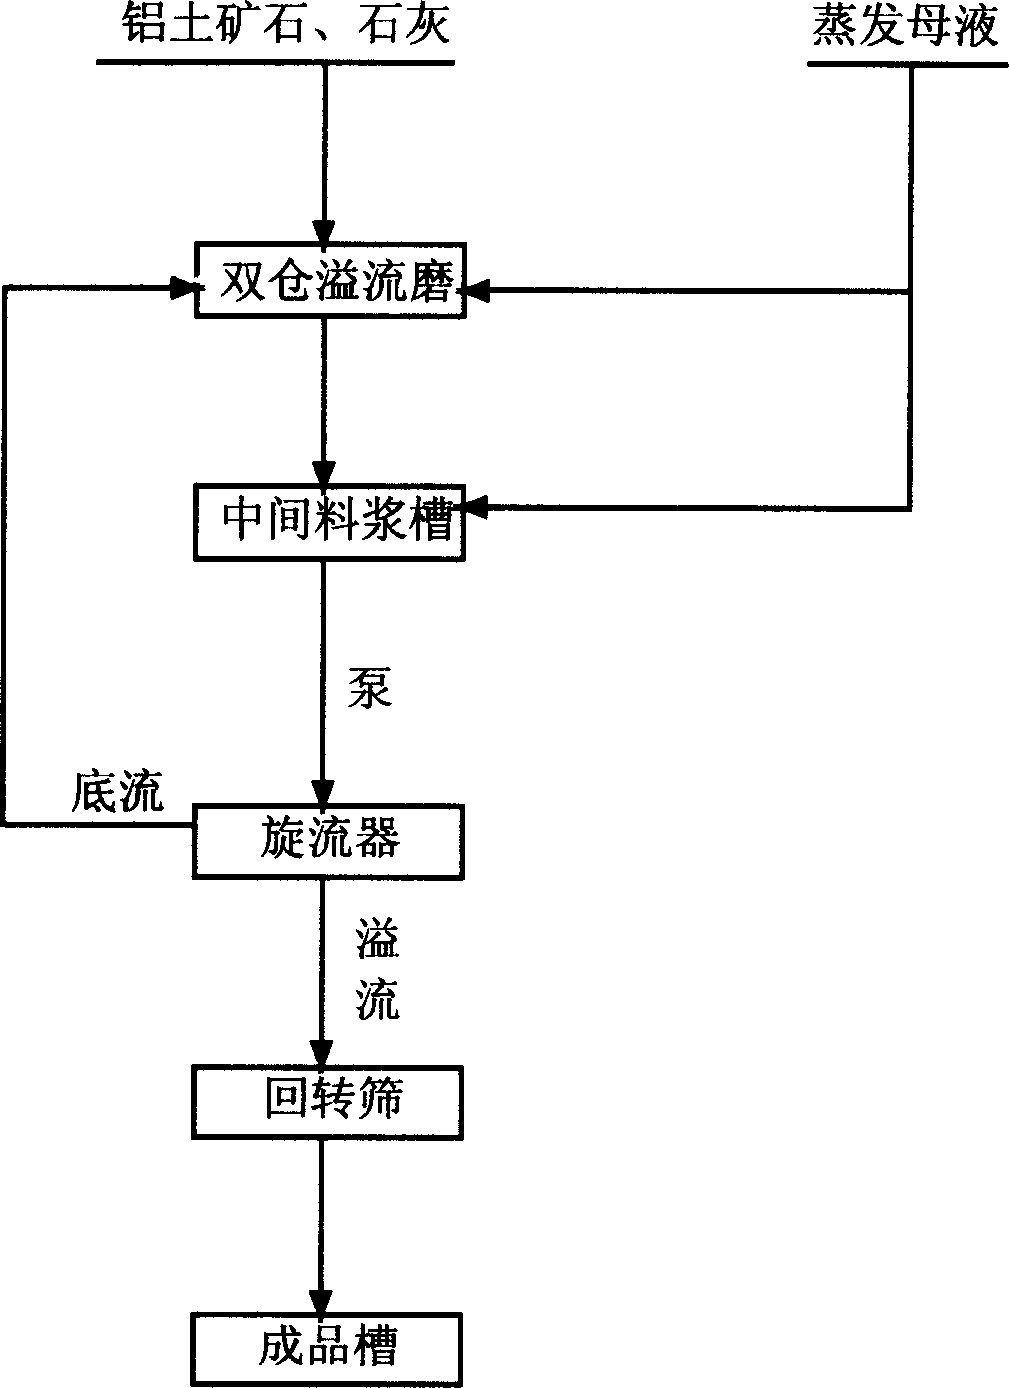 Bauxite grinding technology and apparatus thereof